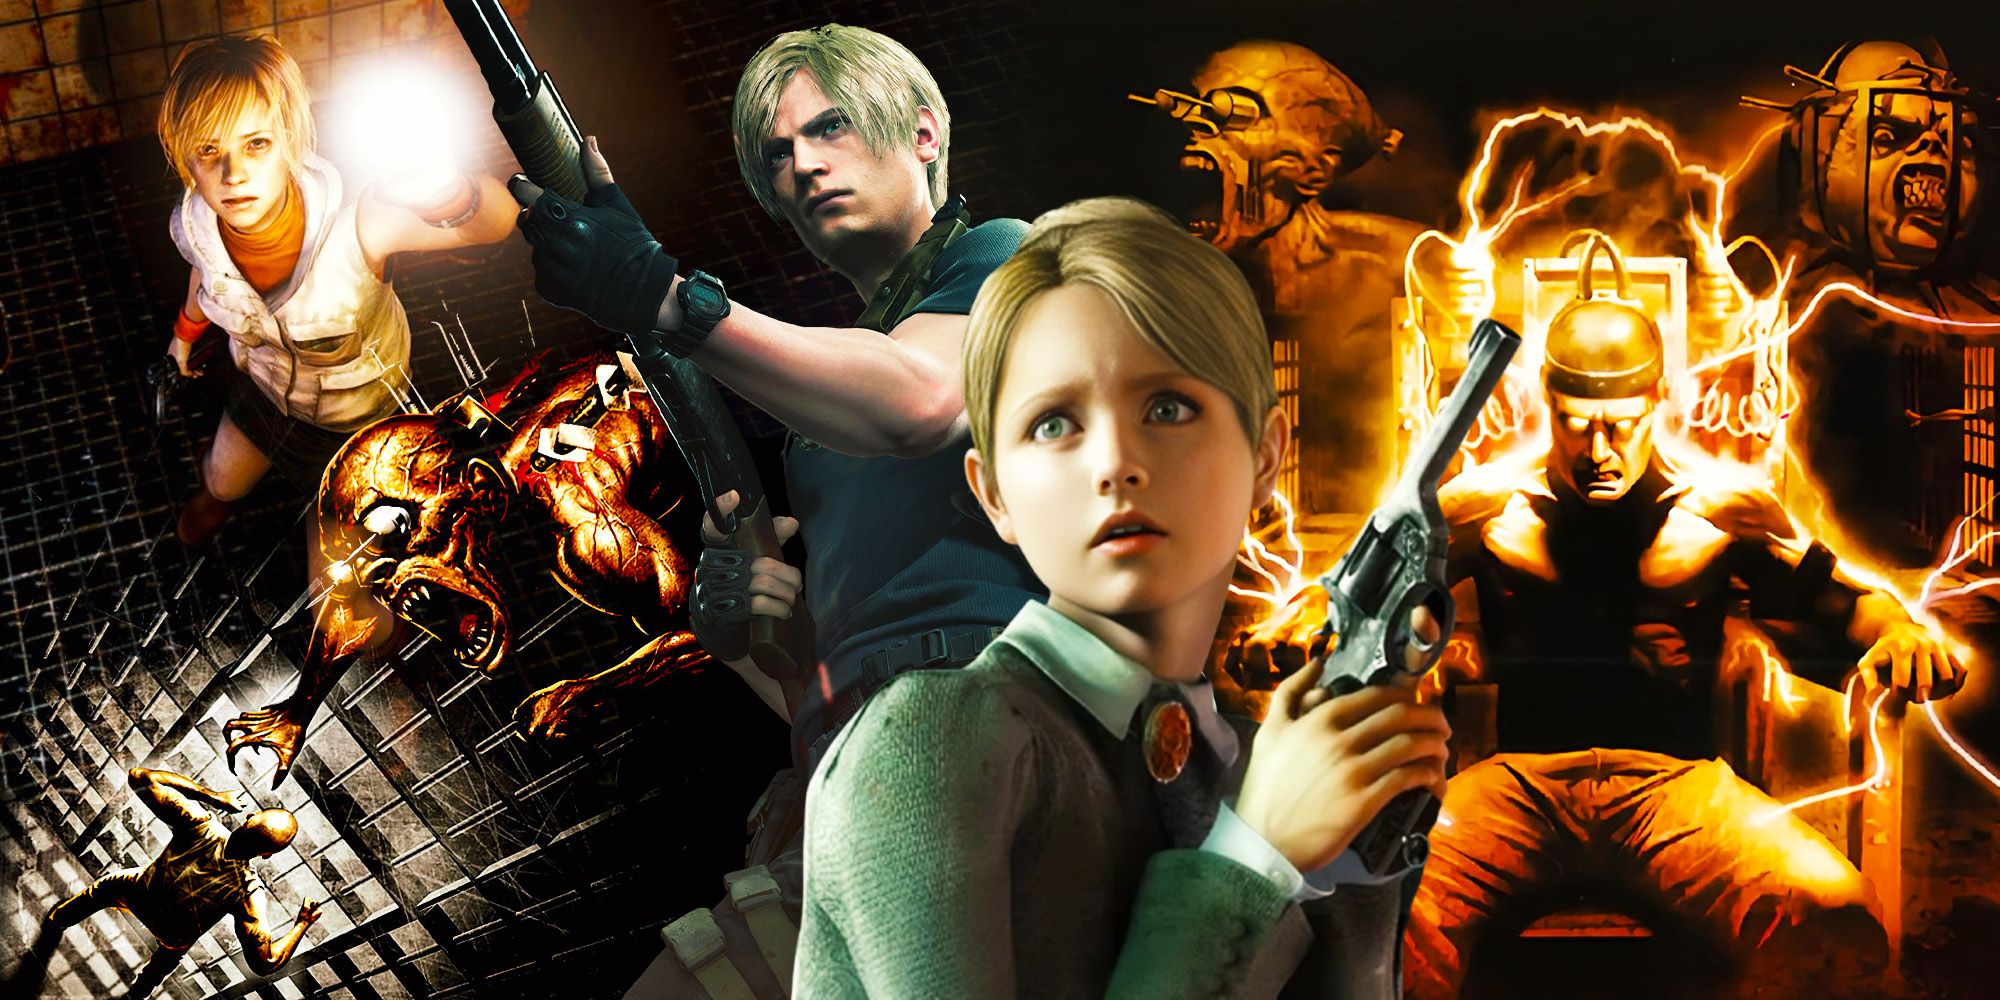 Characters from Silent Hill 3, Resident Evil 4, Rule of Rose, and The Suffering.